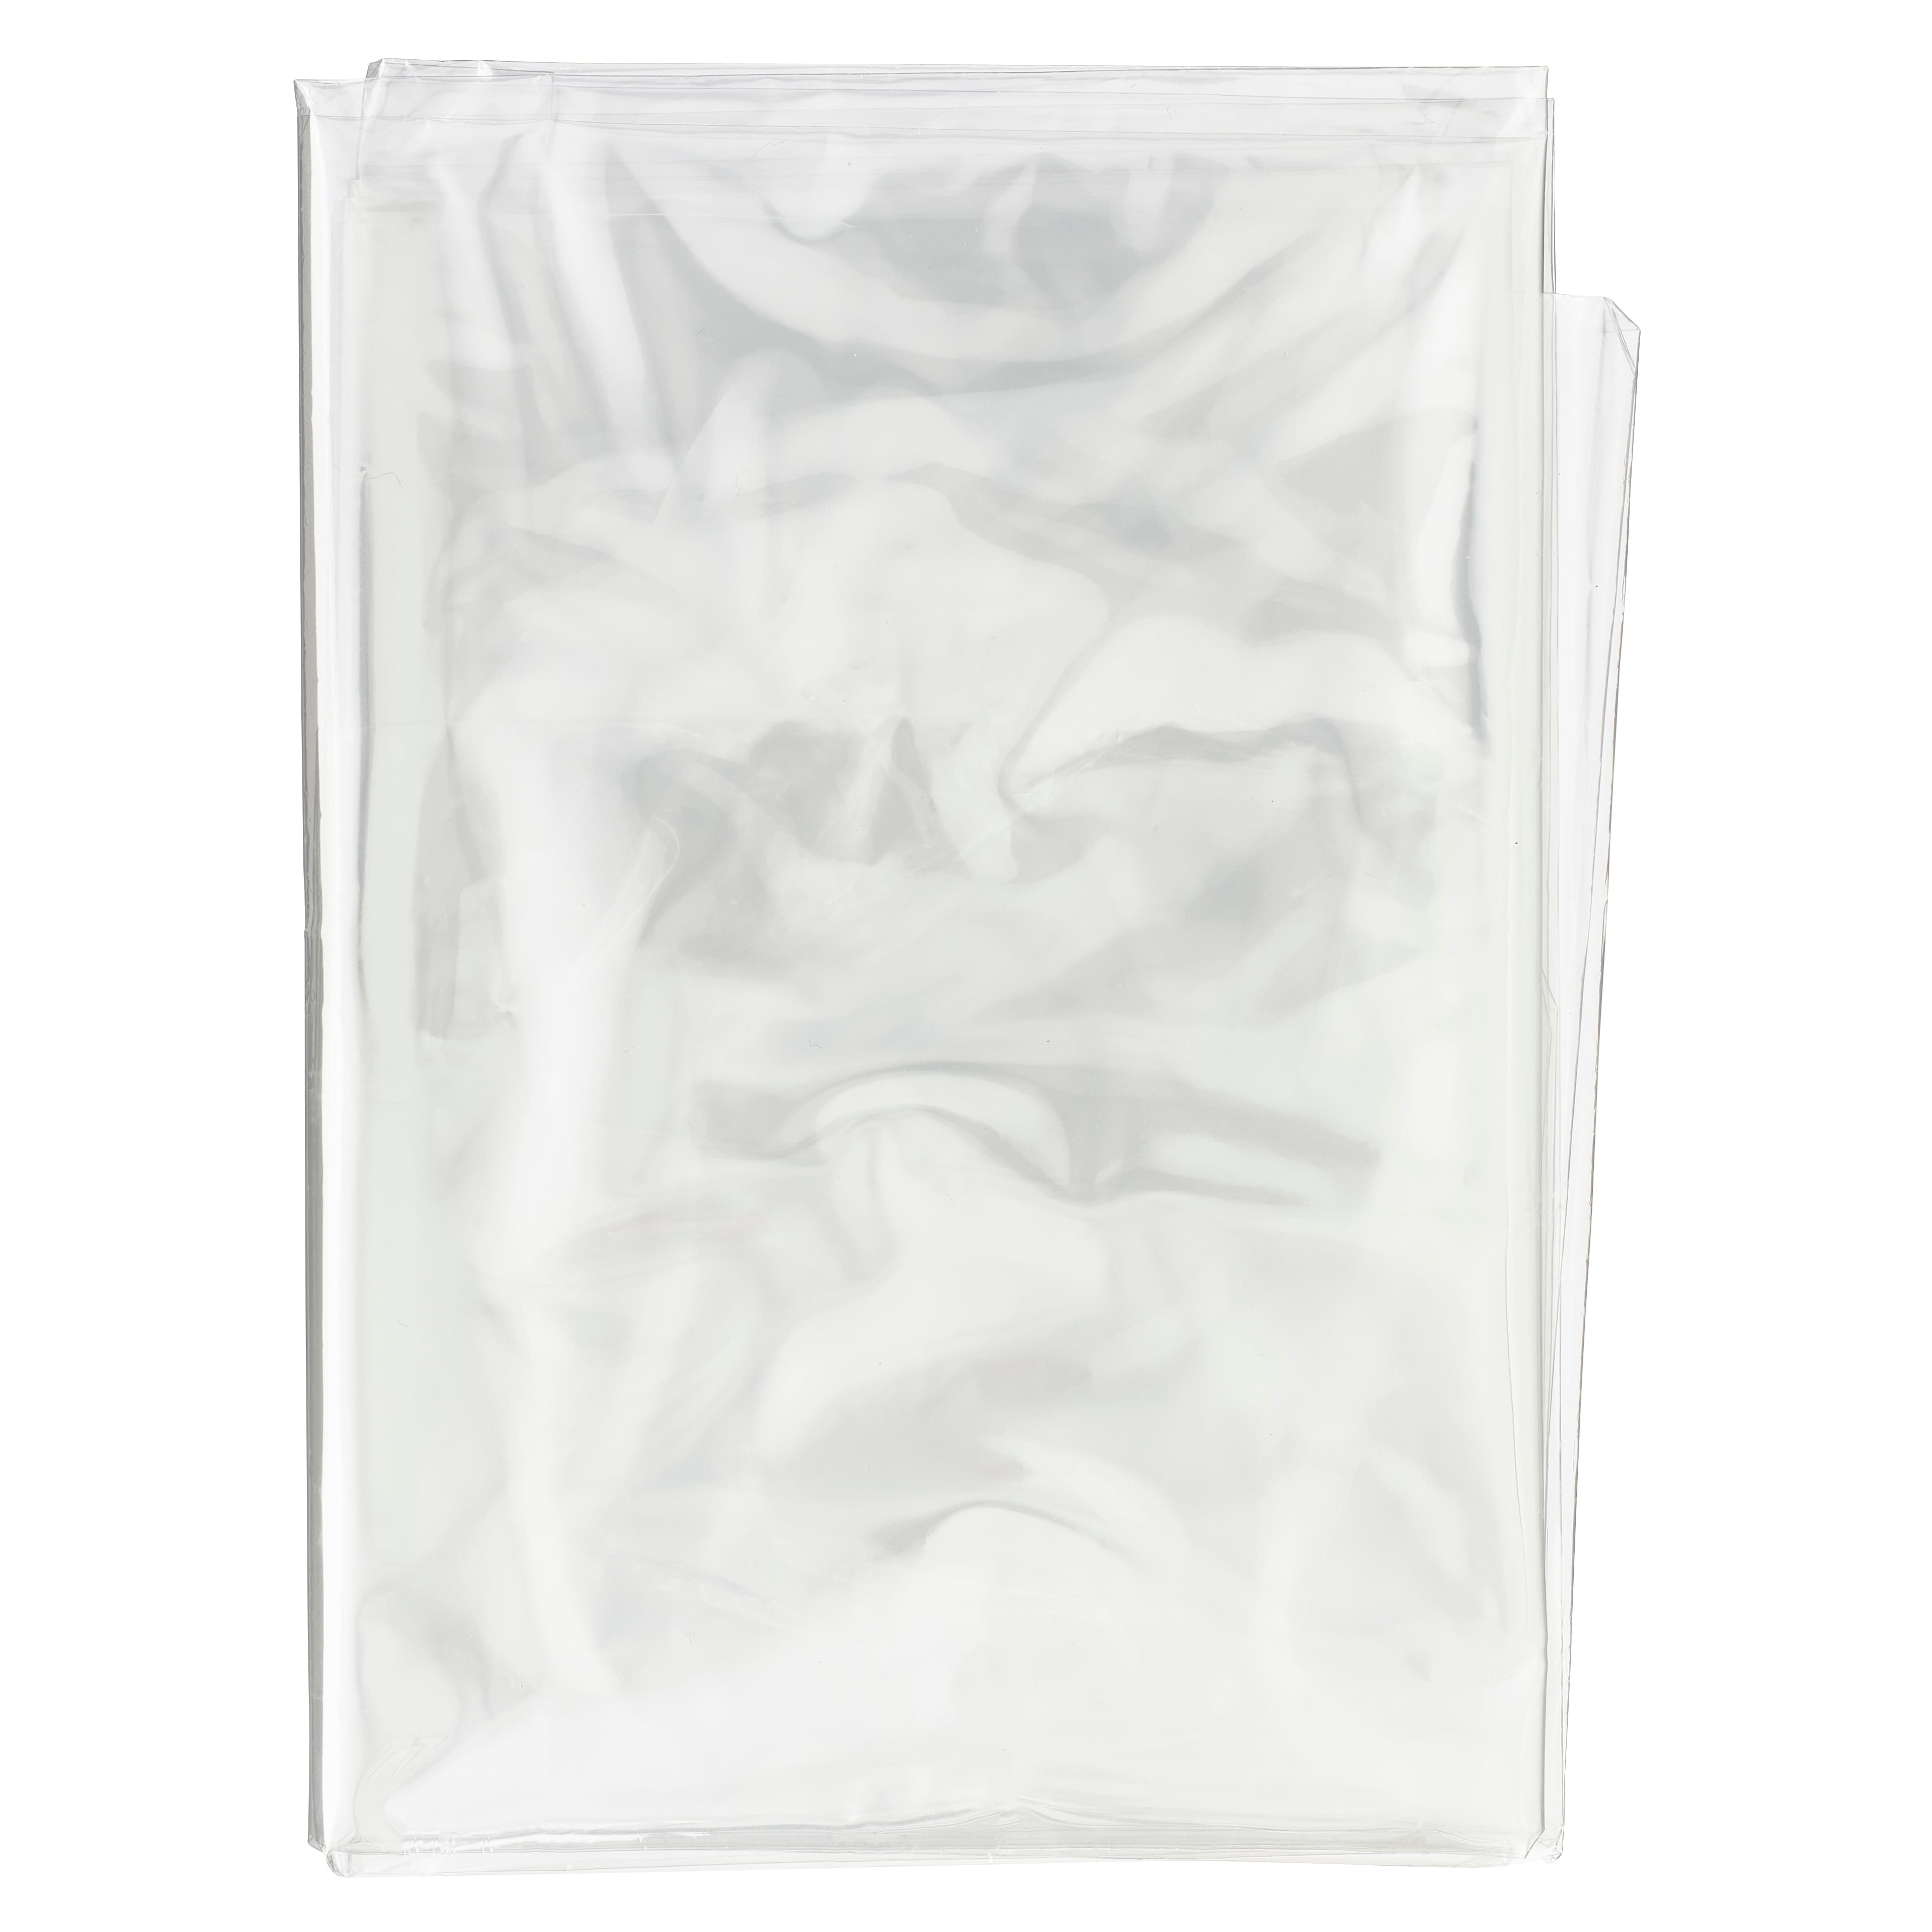 12 Pack: 30&#x22; Clear Shrink Wrap Bag by Celebrate It&#x2122;